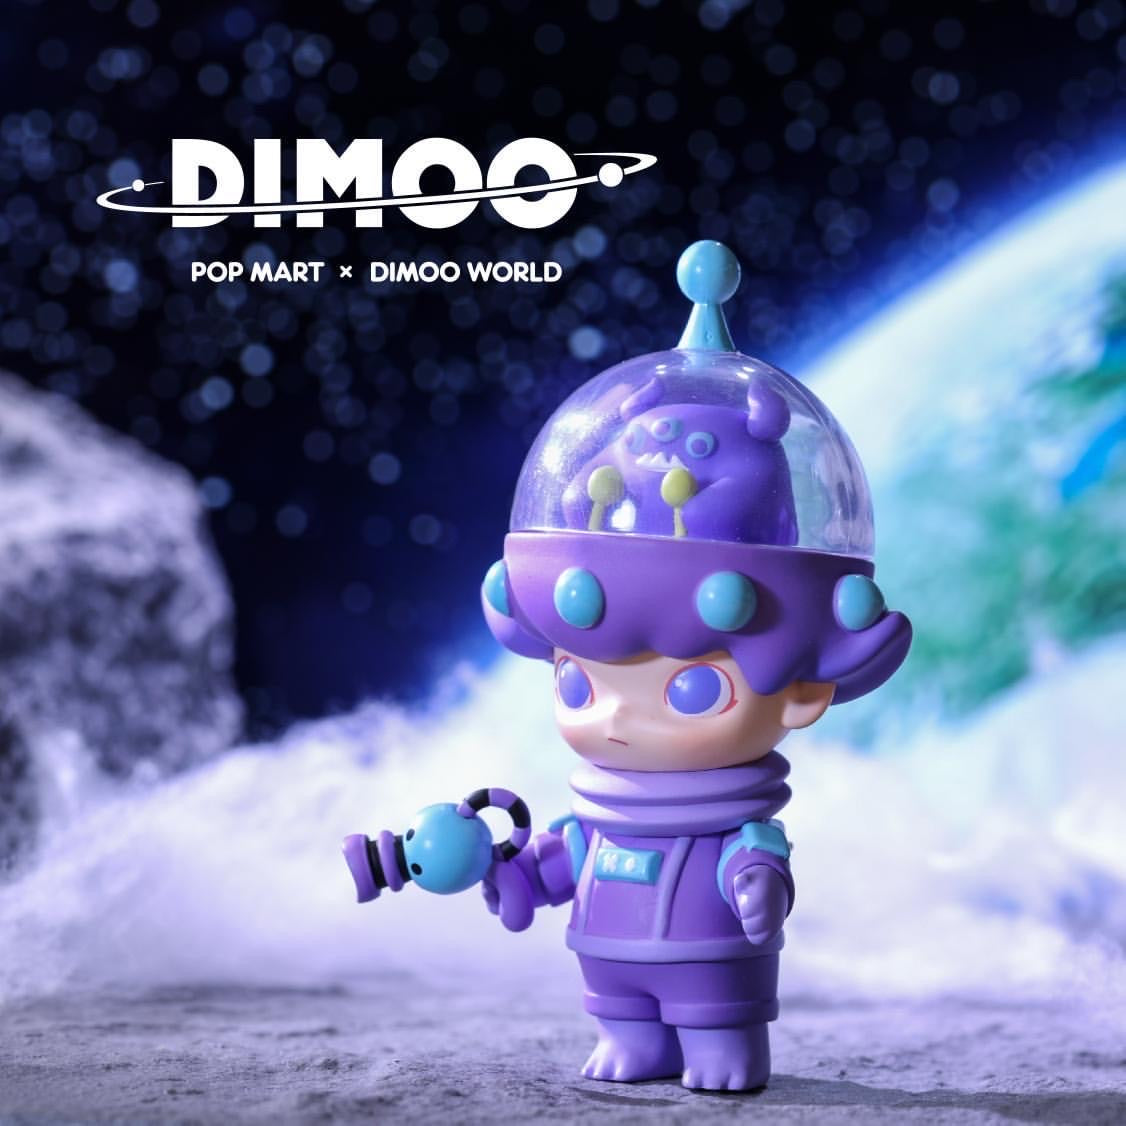 Dimoo Space Travel Mini Series by Ayan x Pop Mart